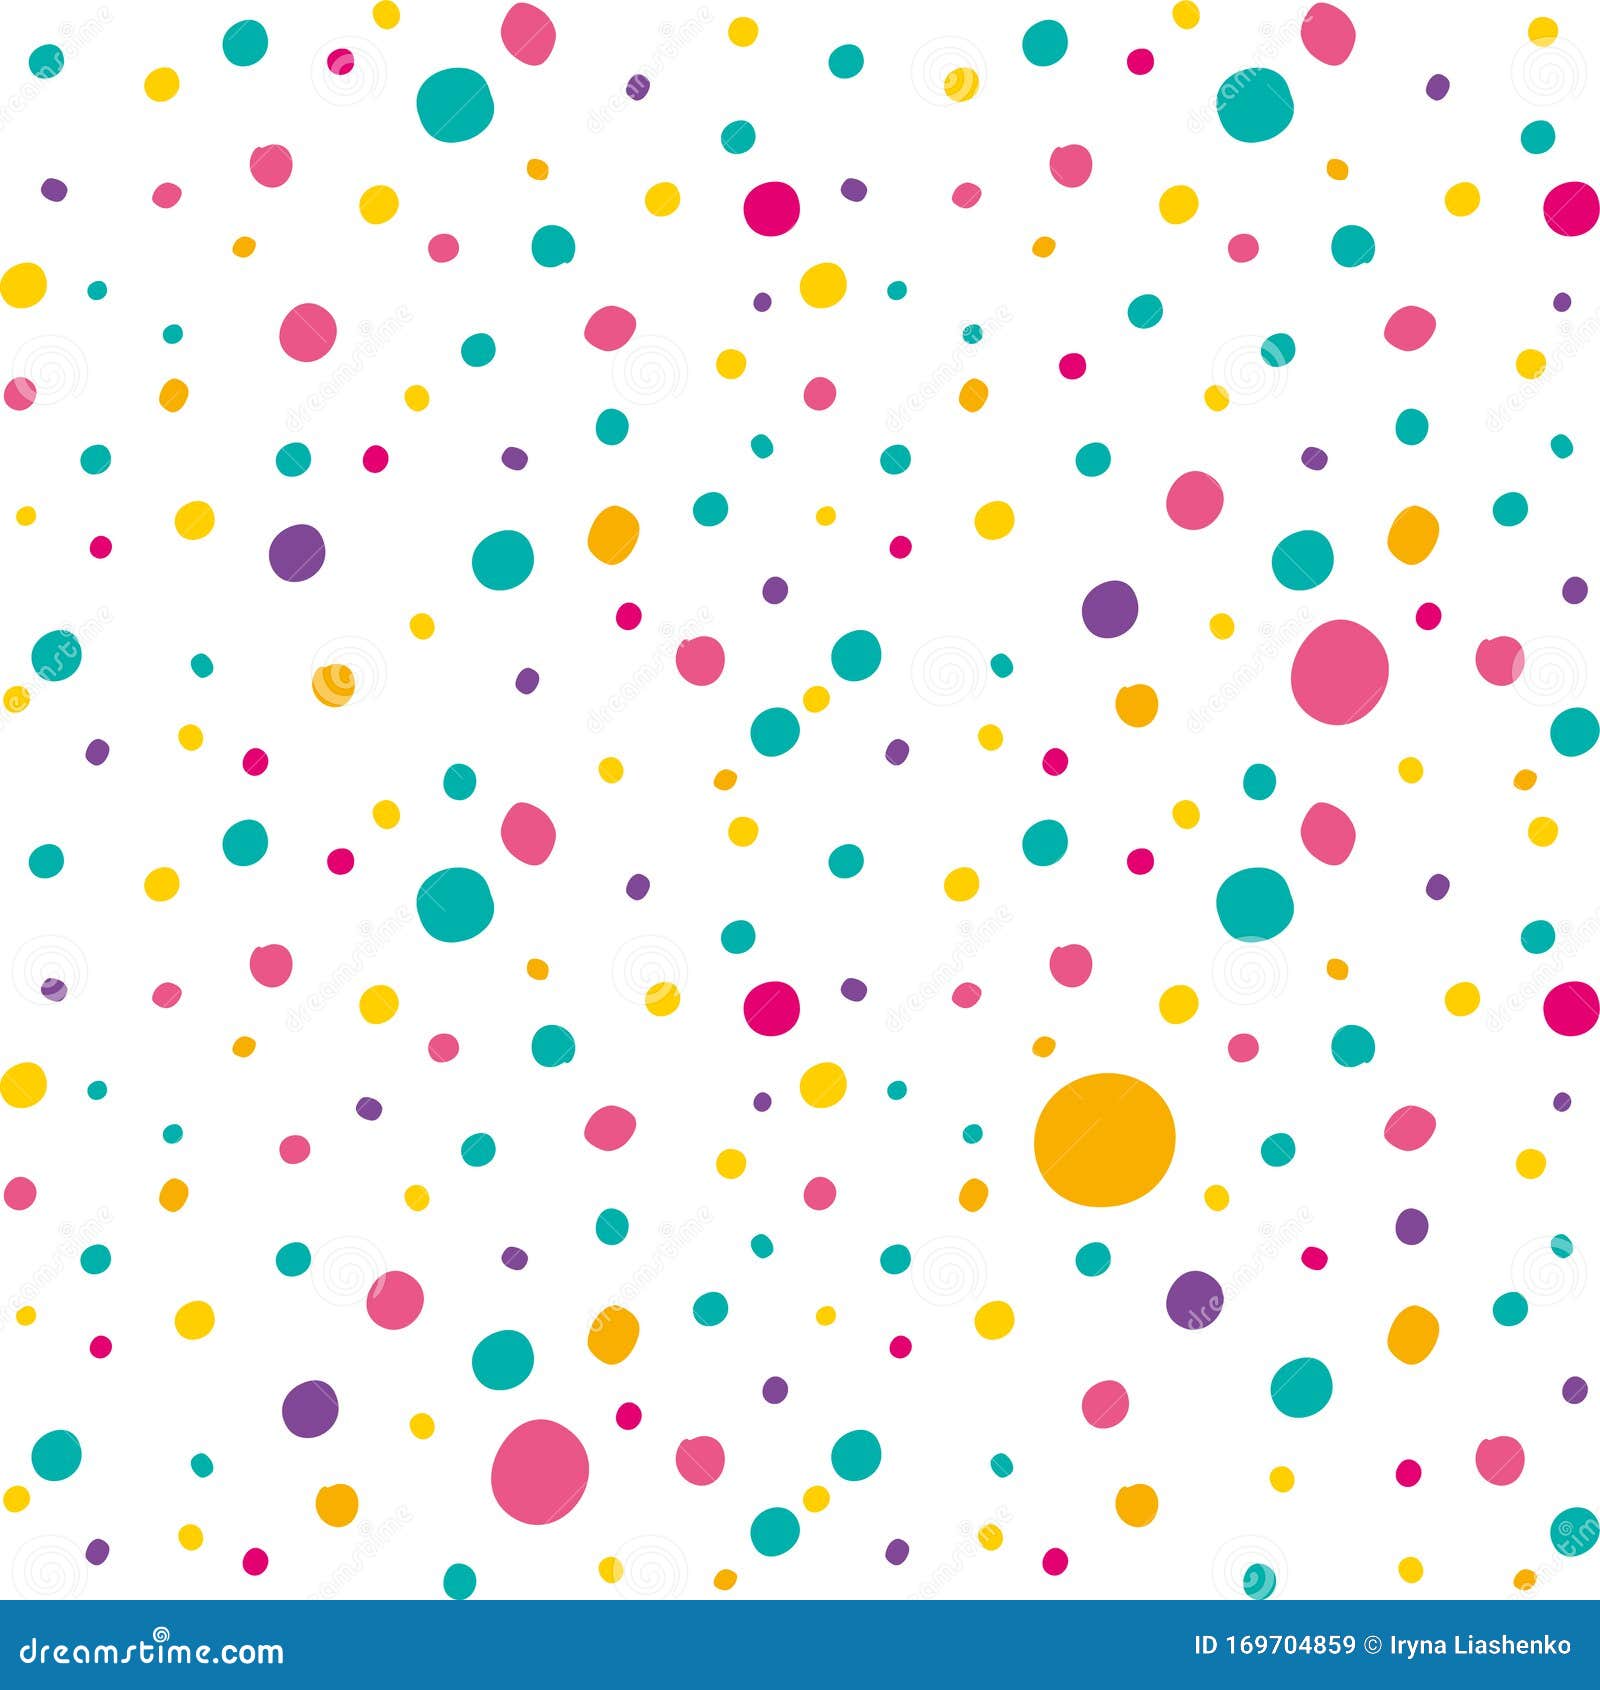 Bright Multi Colored Polka Dot Pattern Vector Seamless Background ...